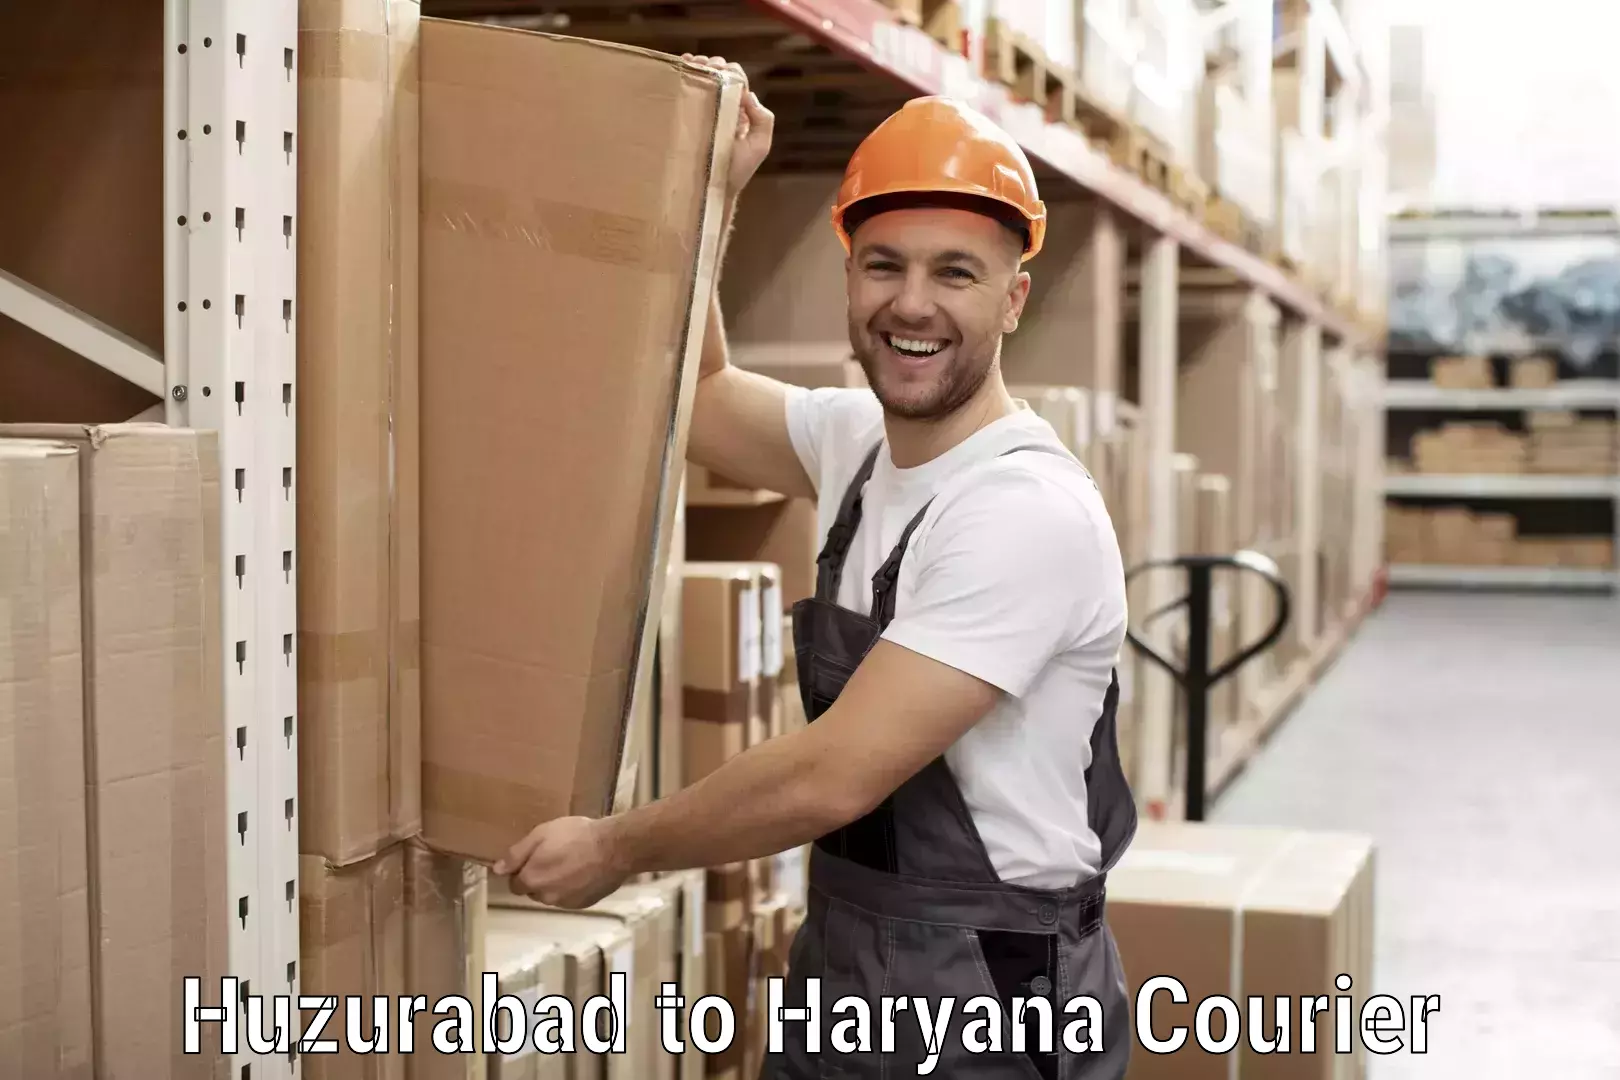 24-hour courier services Huzurabad to Gurgaon